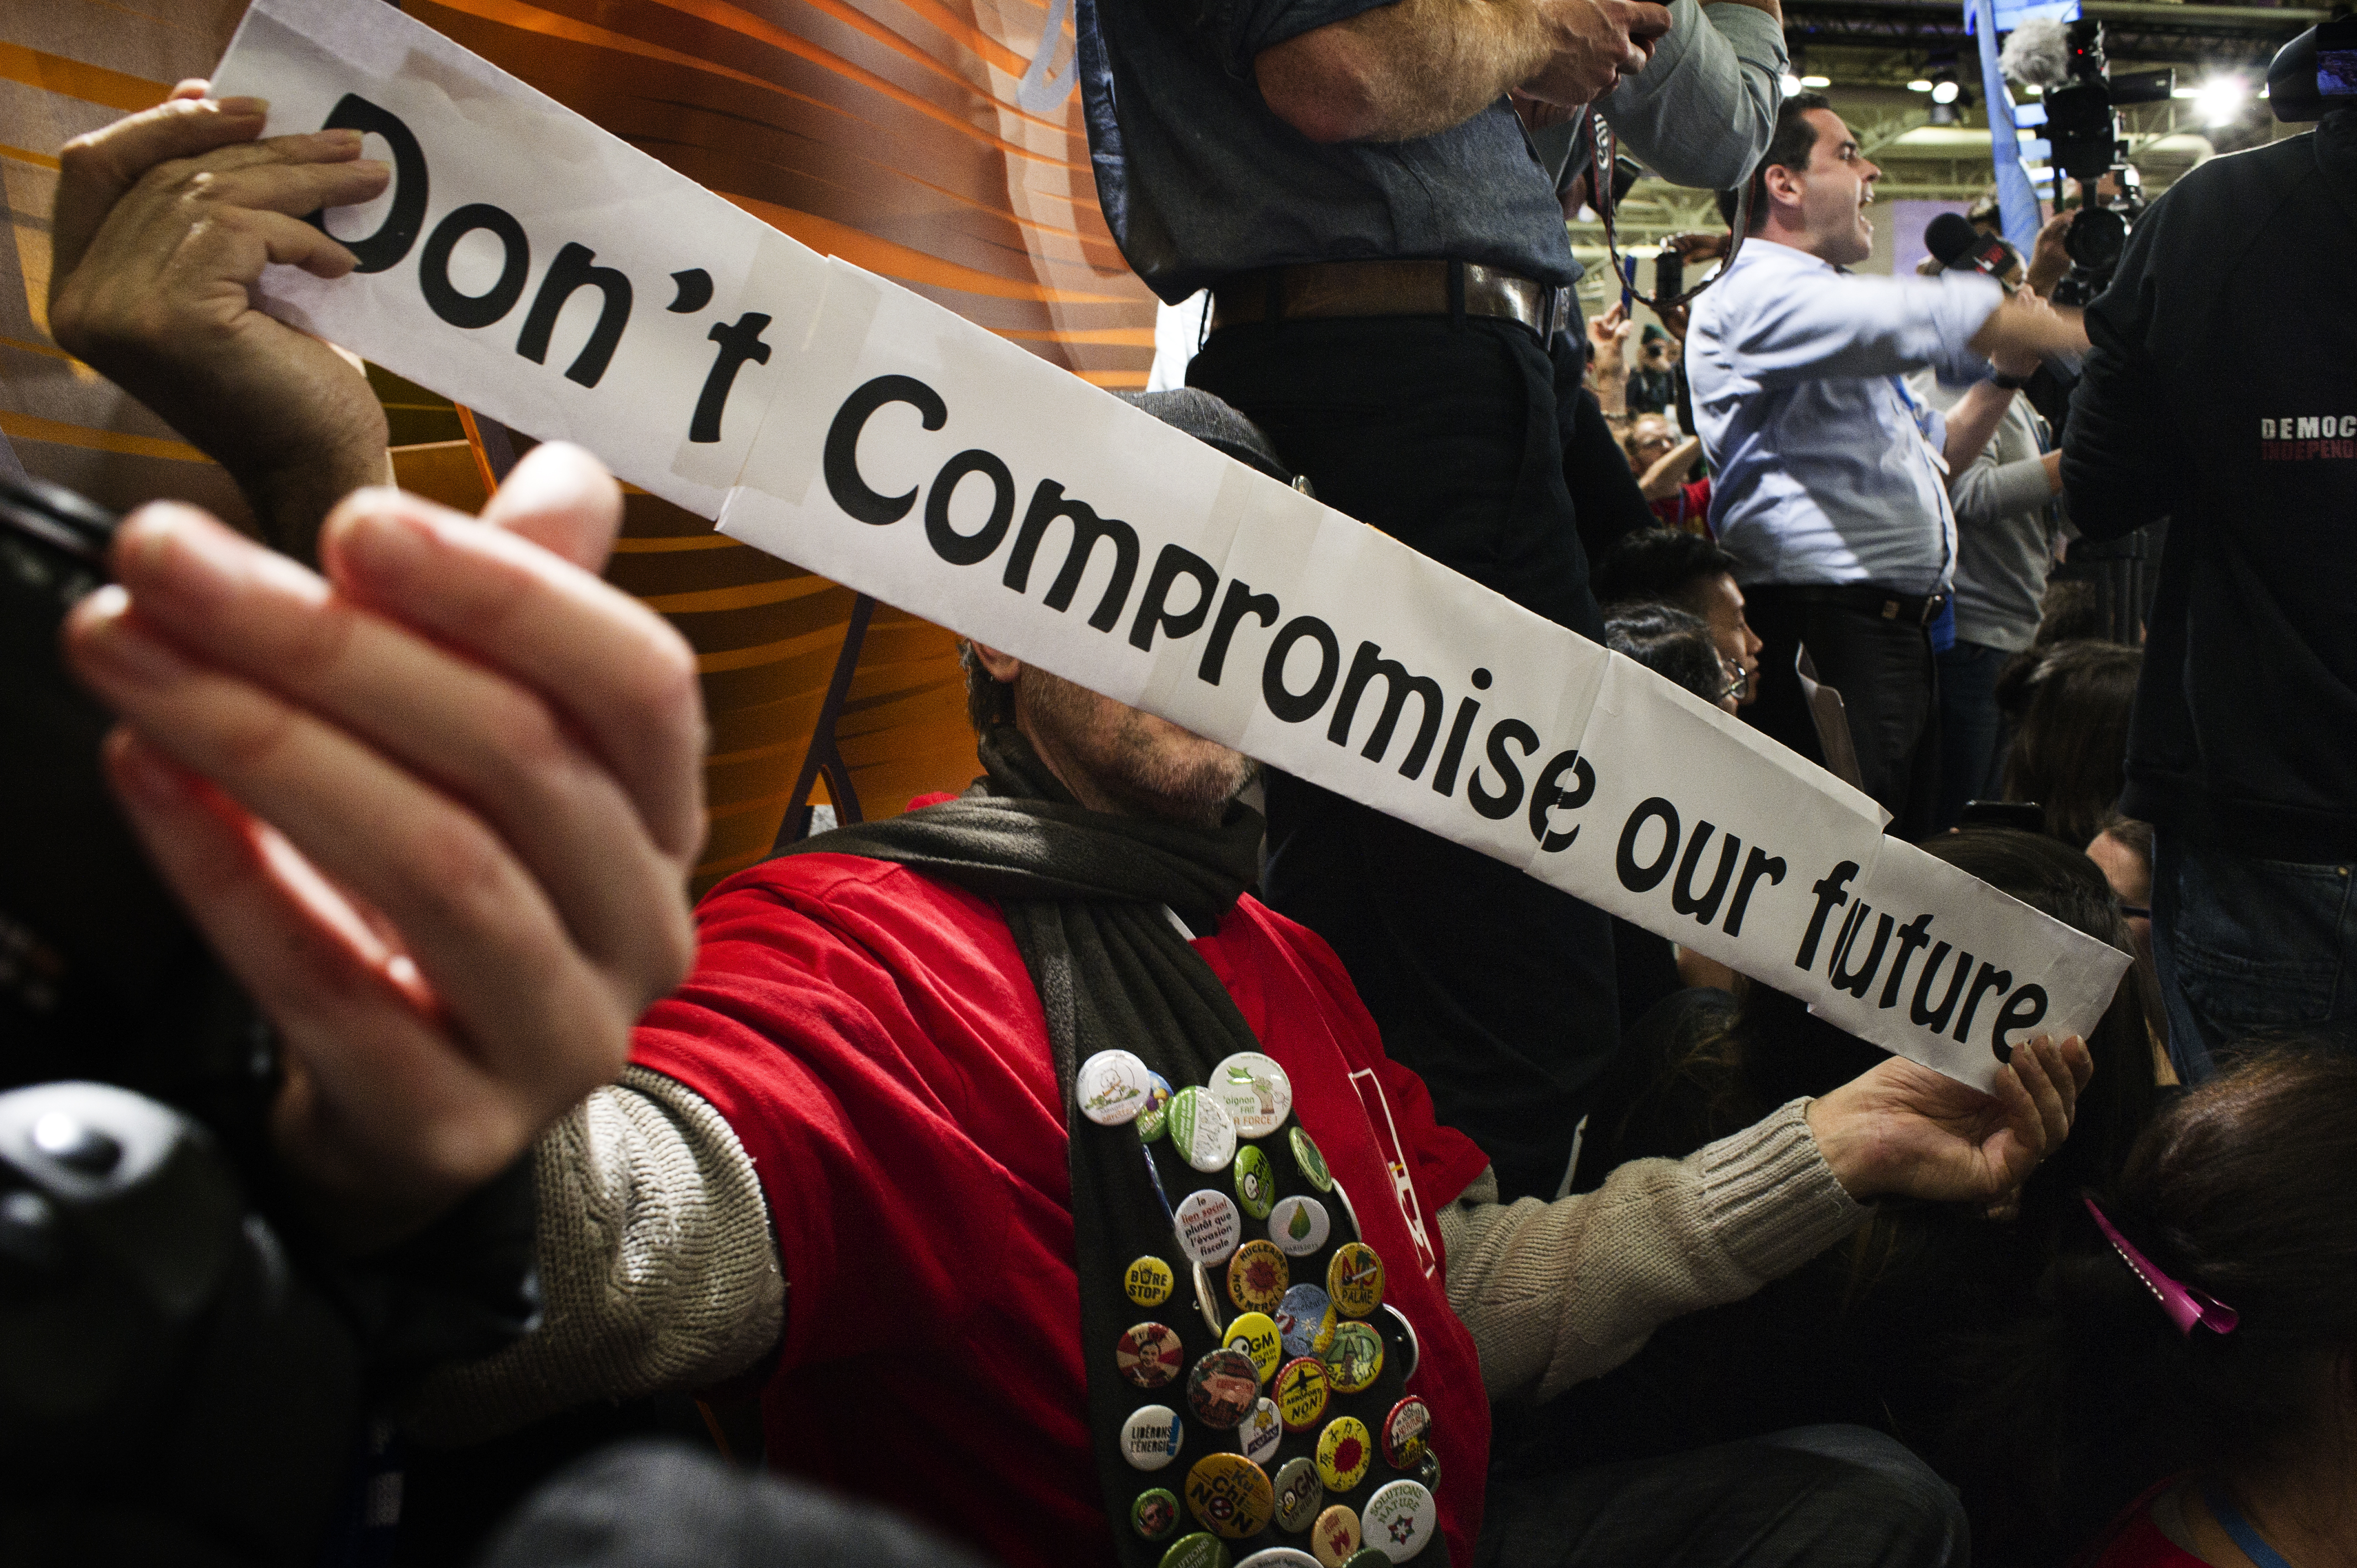 A protester holds a sign reading 'Don't Compromise our future' during a protest at the UN climate change conference in Le Bourget, France, December 9, 2015. Benjamin Géminel/COP21 